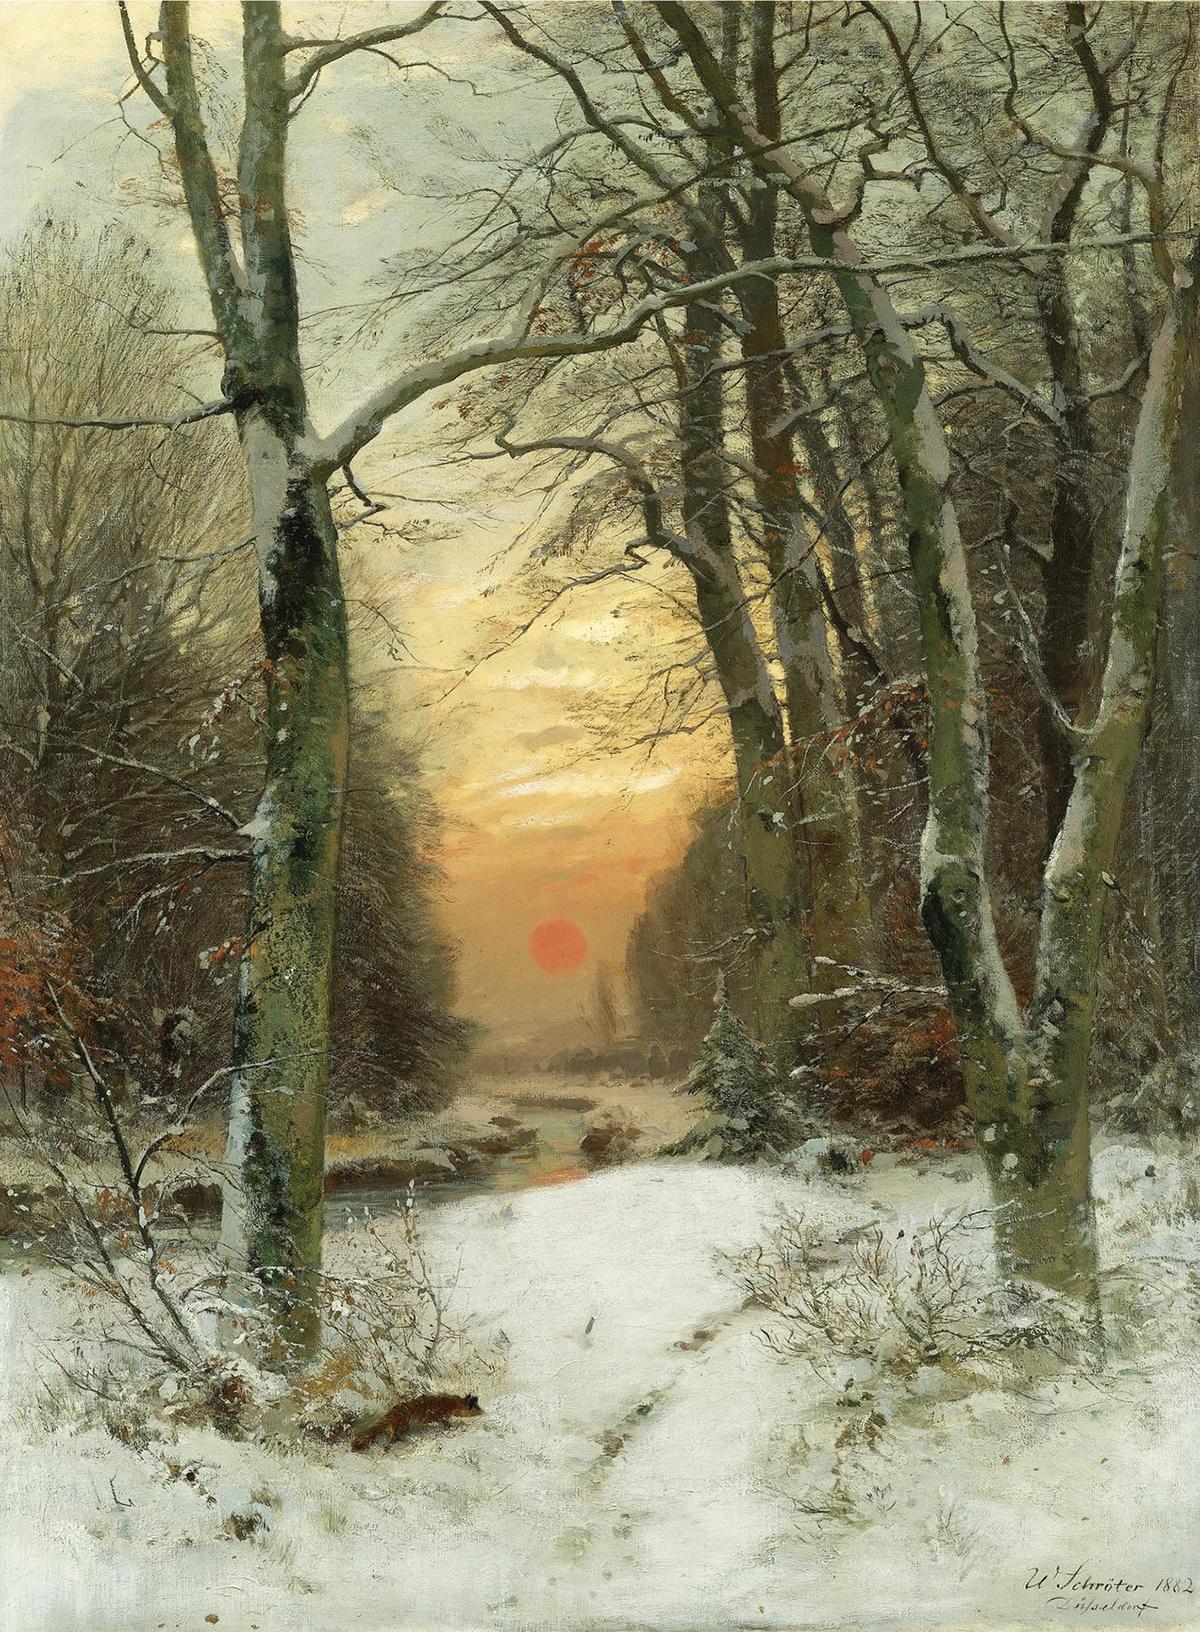 Some poets have remarked on the quietude and stillness of a new snowfall. "Winter Landscape," 1882, by Wilhelm Schröter. Oil on canvas. (Public Domain)